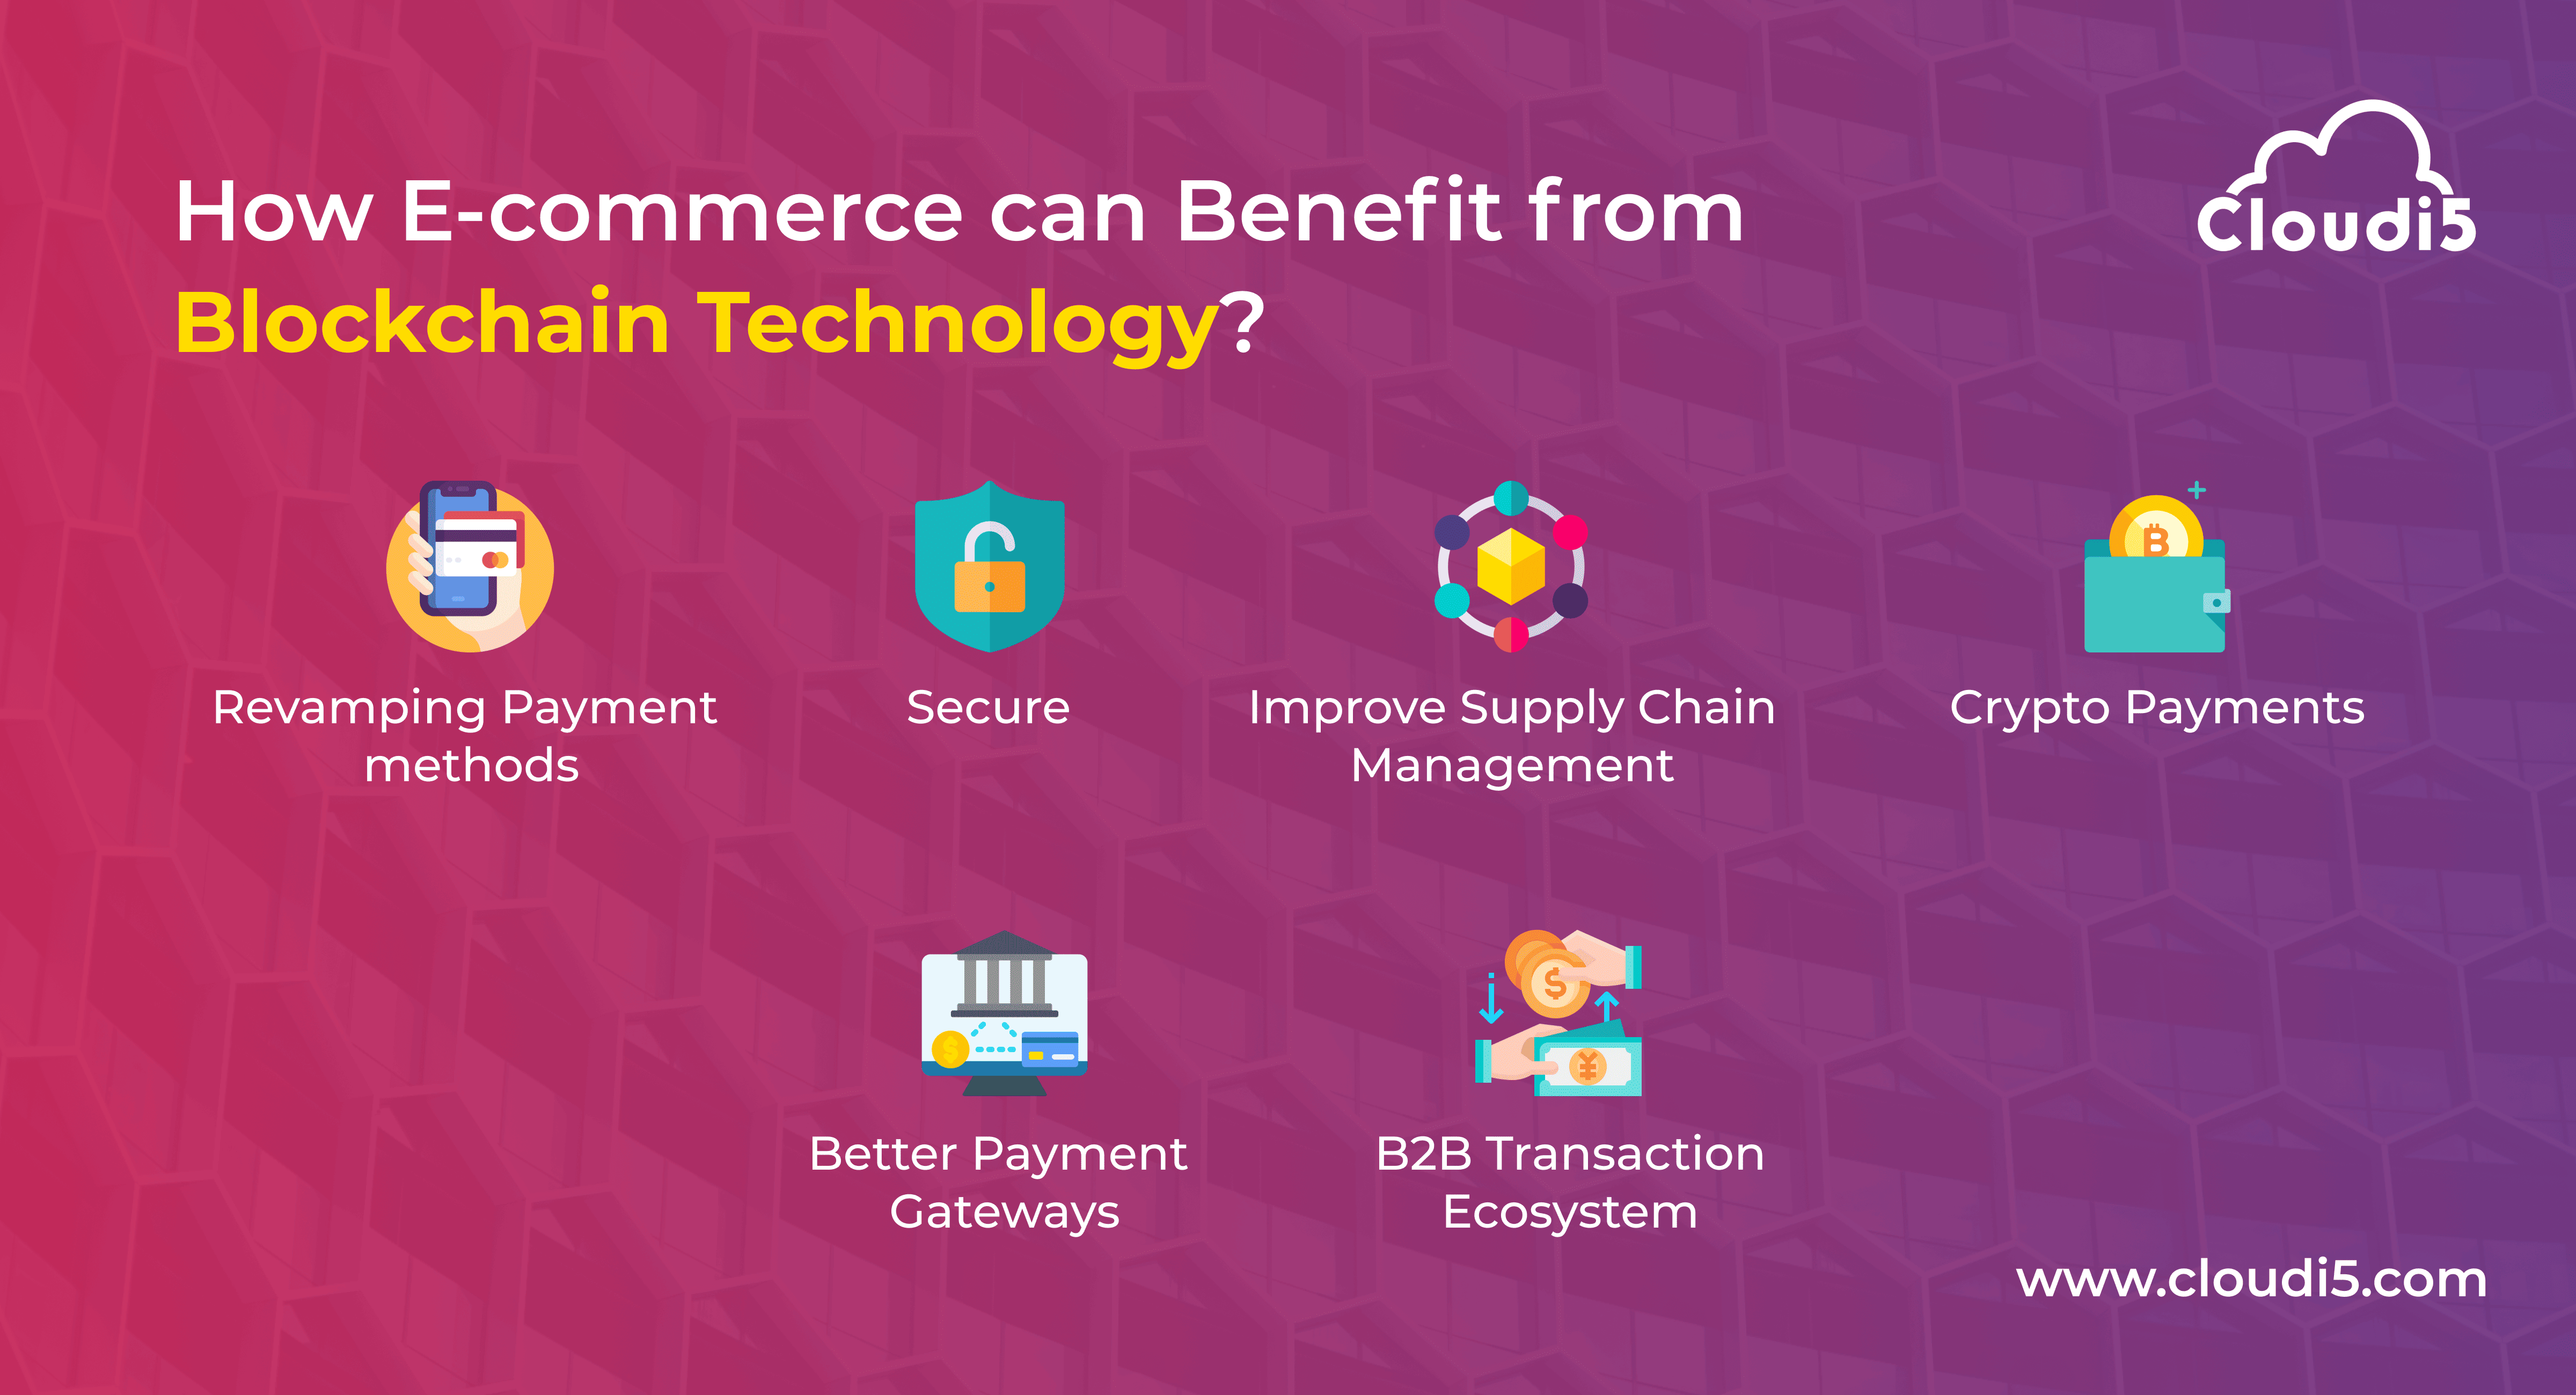 How E-commerce Can Benefit from Blockchain Technology?